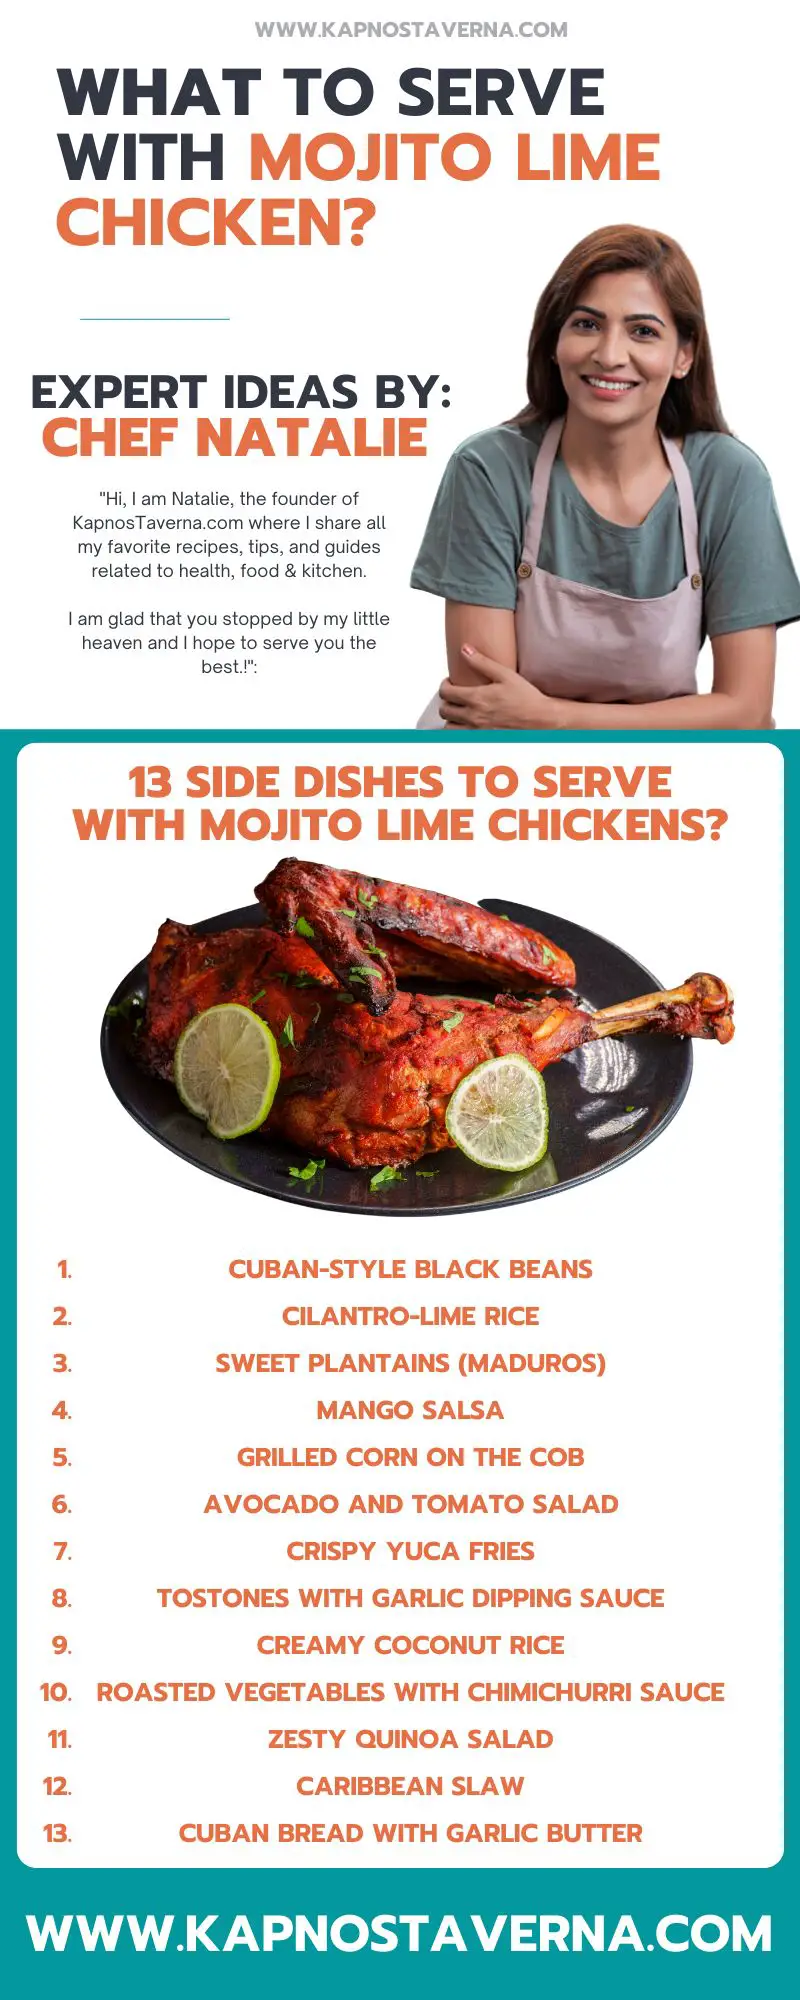 Side Dishes idea to Serve with Mojito Lime Chicken by Chef Natalie